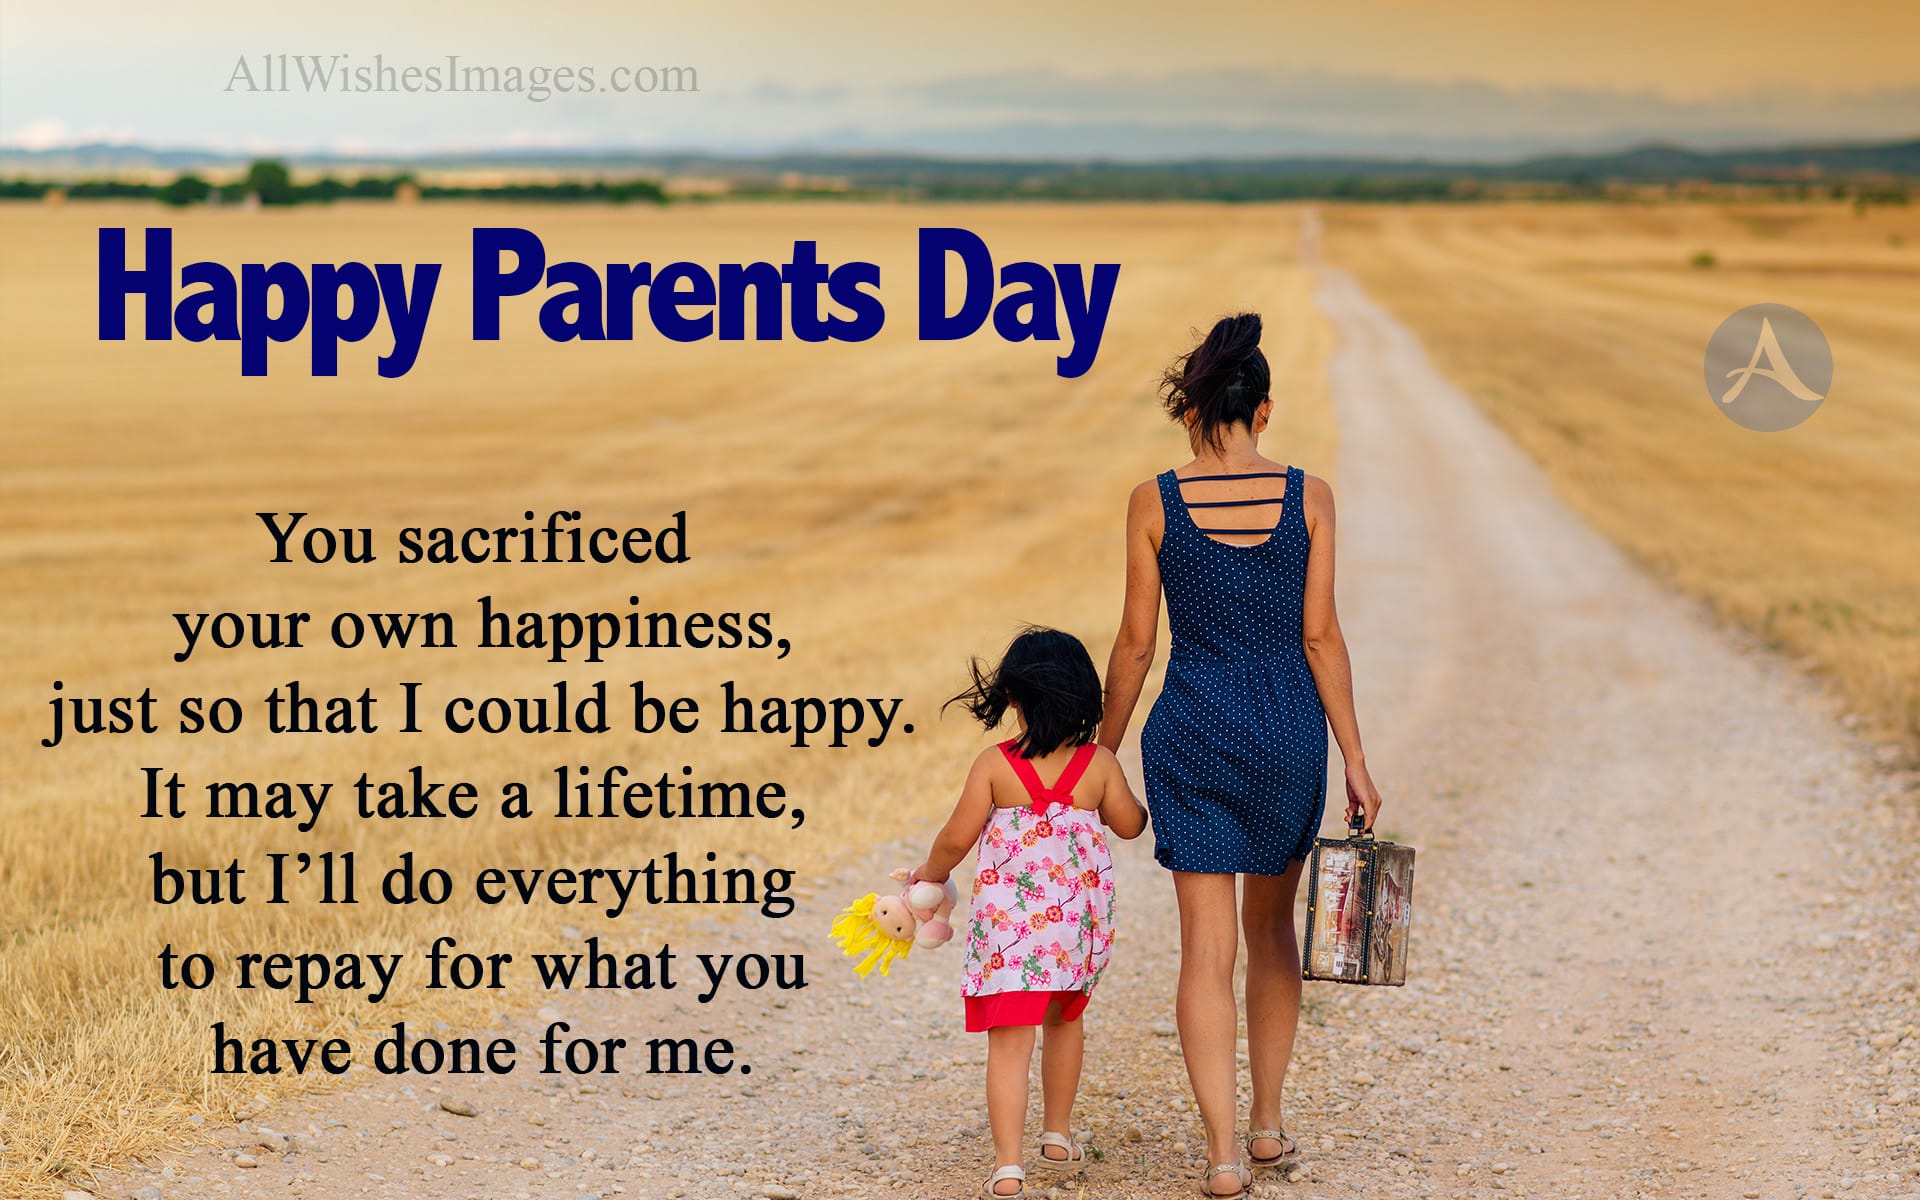 Parents Day Wishes Images 2022 - Happy Parents Day Greetings - All Wishes  Images - Images for WhatsApp